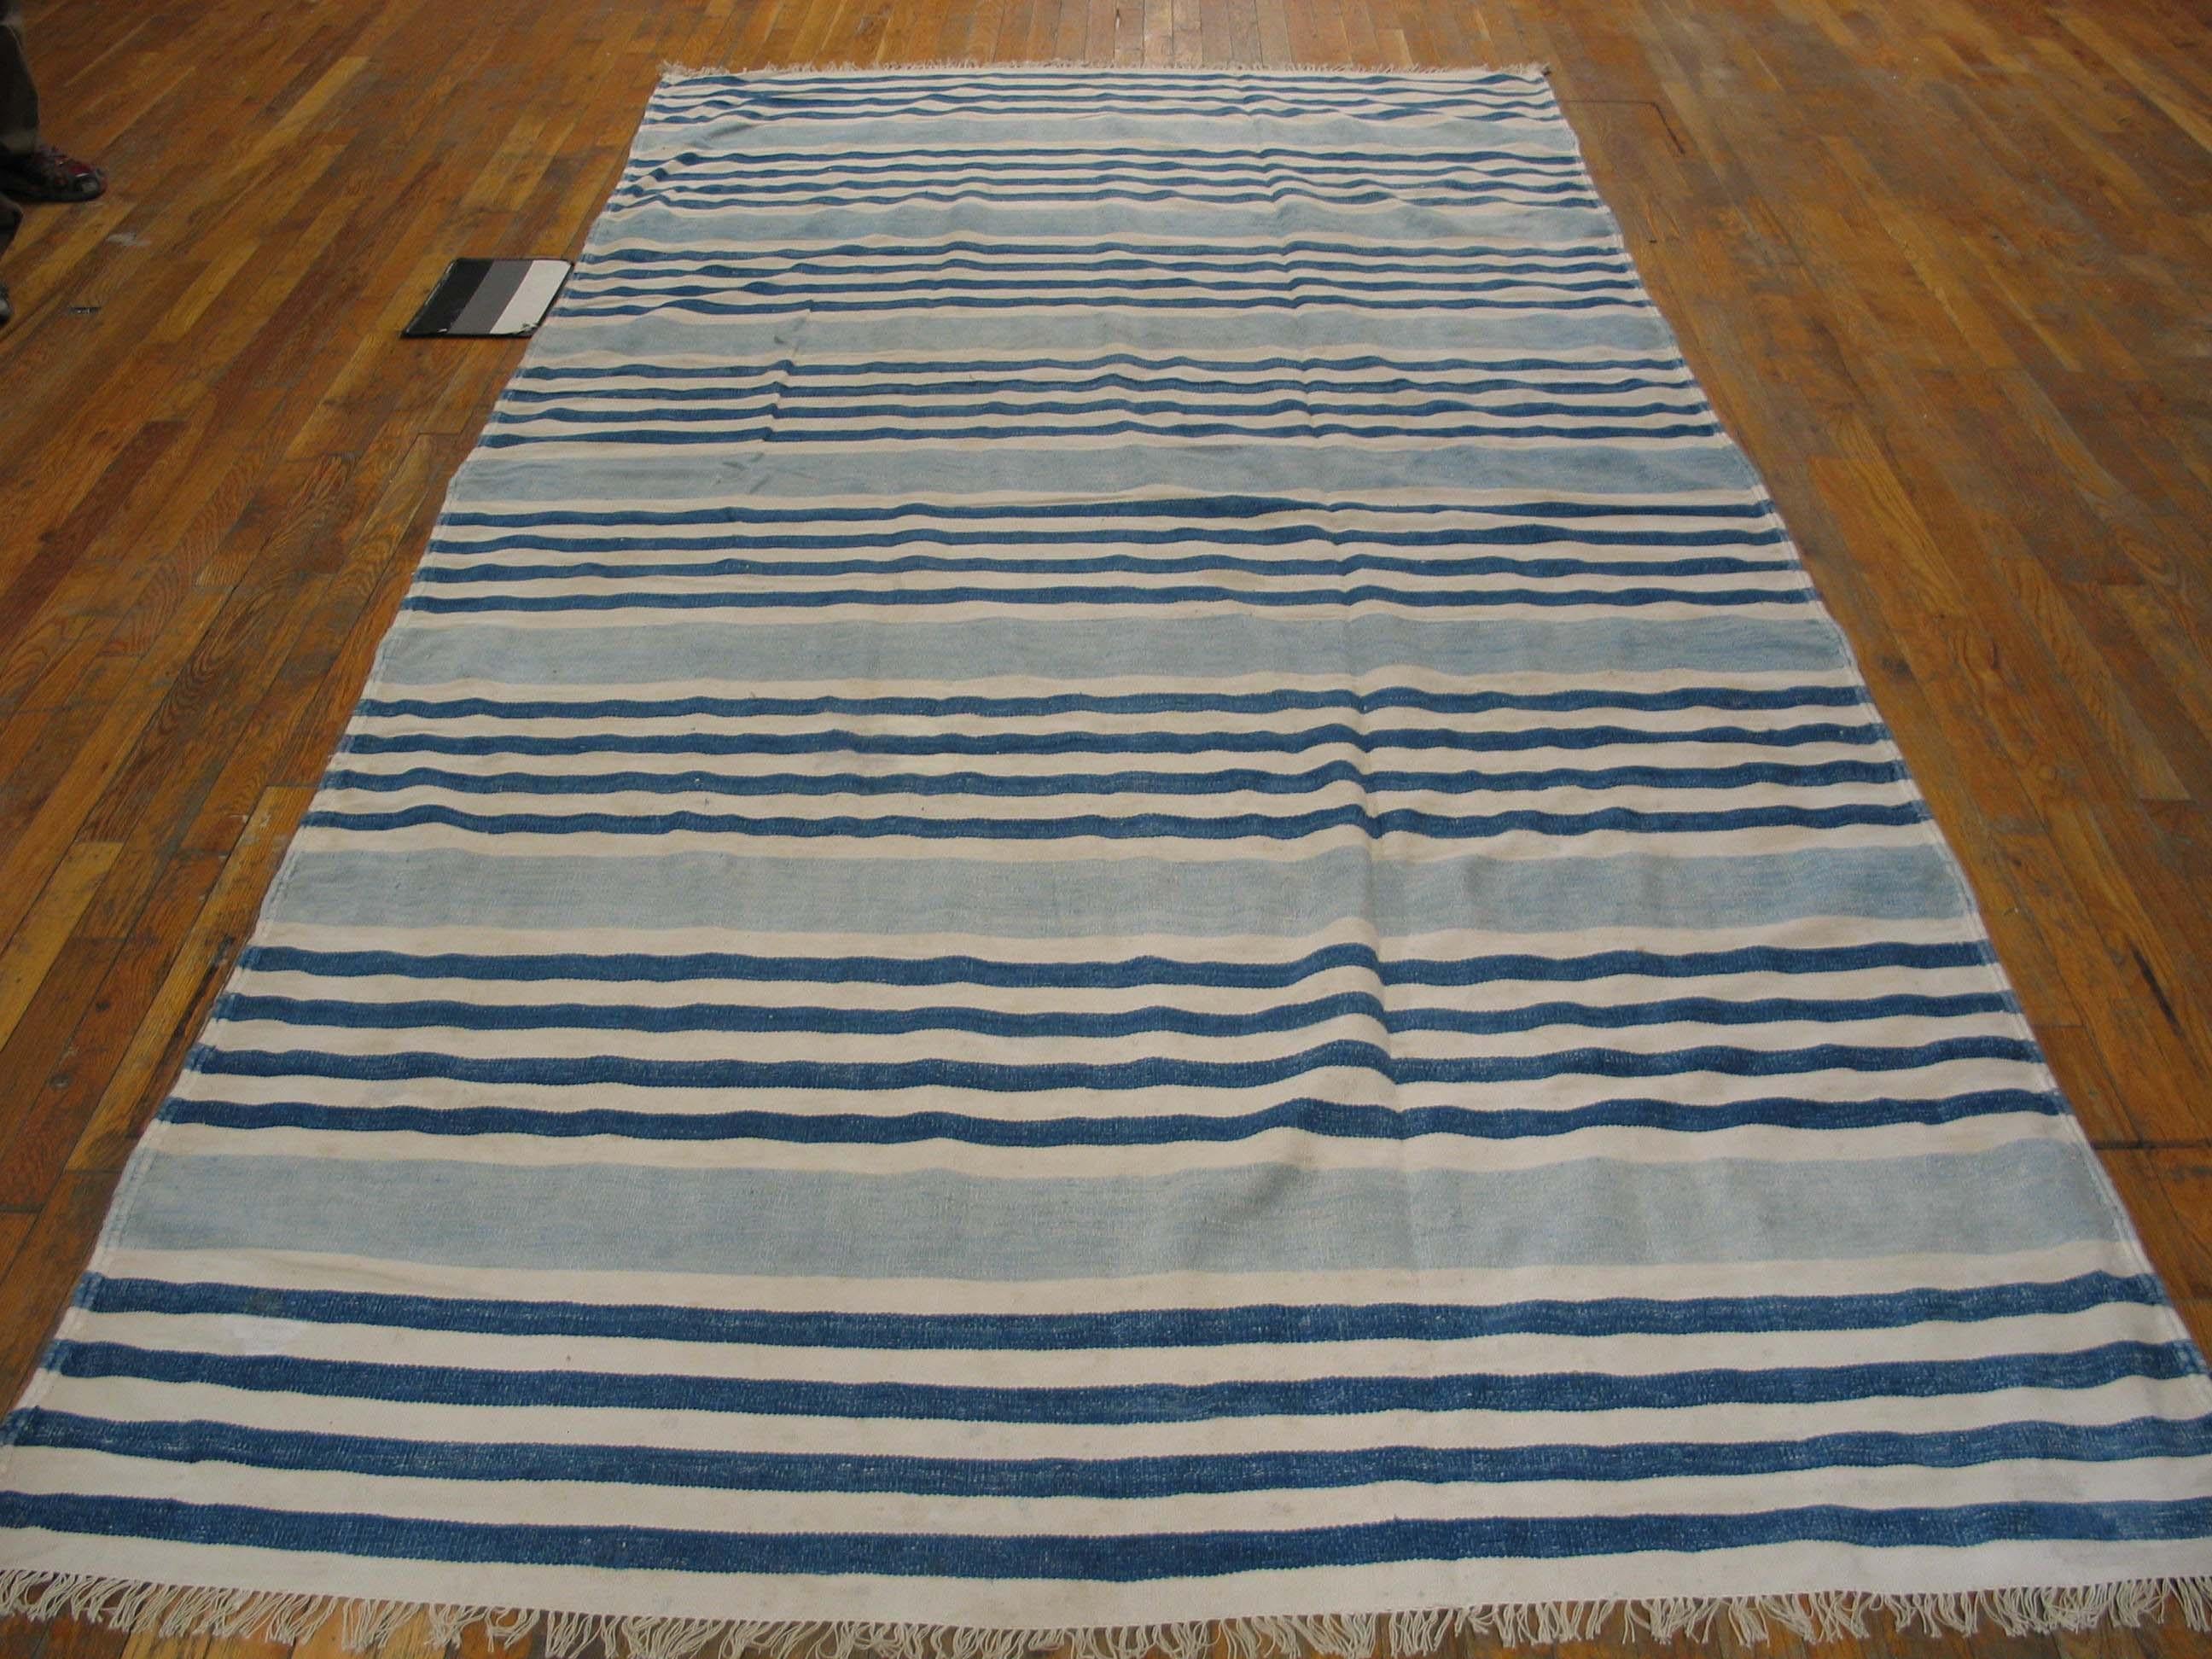 Nine bunches of ecru and denim blue lines, all running borderless along the sides, are divided by wide powder blue stripes on this long-rug (kellegi) format all-cotton Indian antique to vintage flat-weave in good condition. Versatile size,